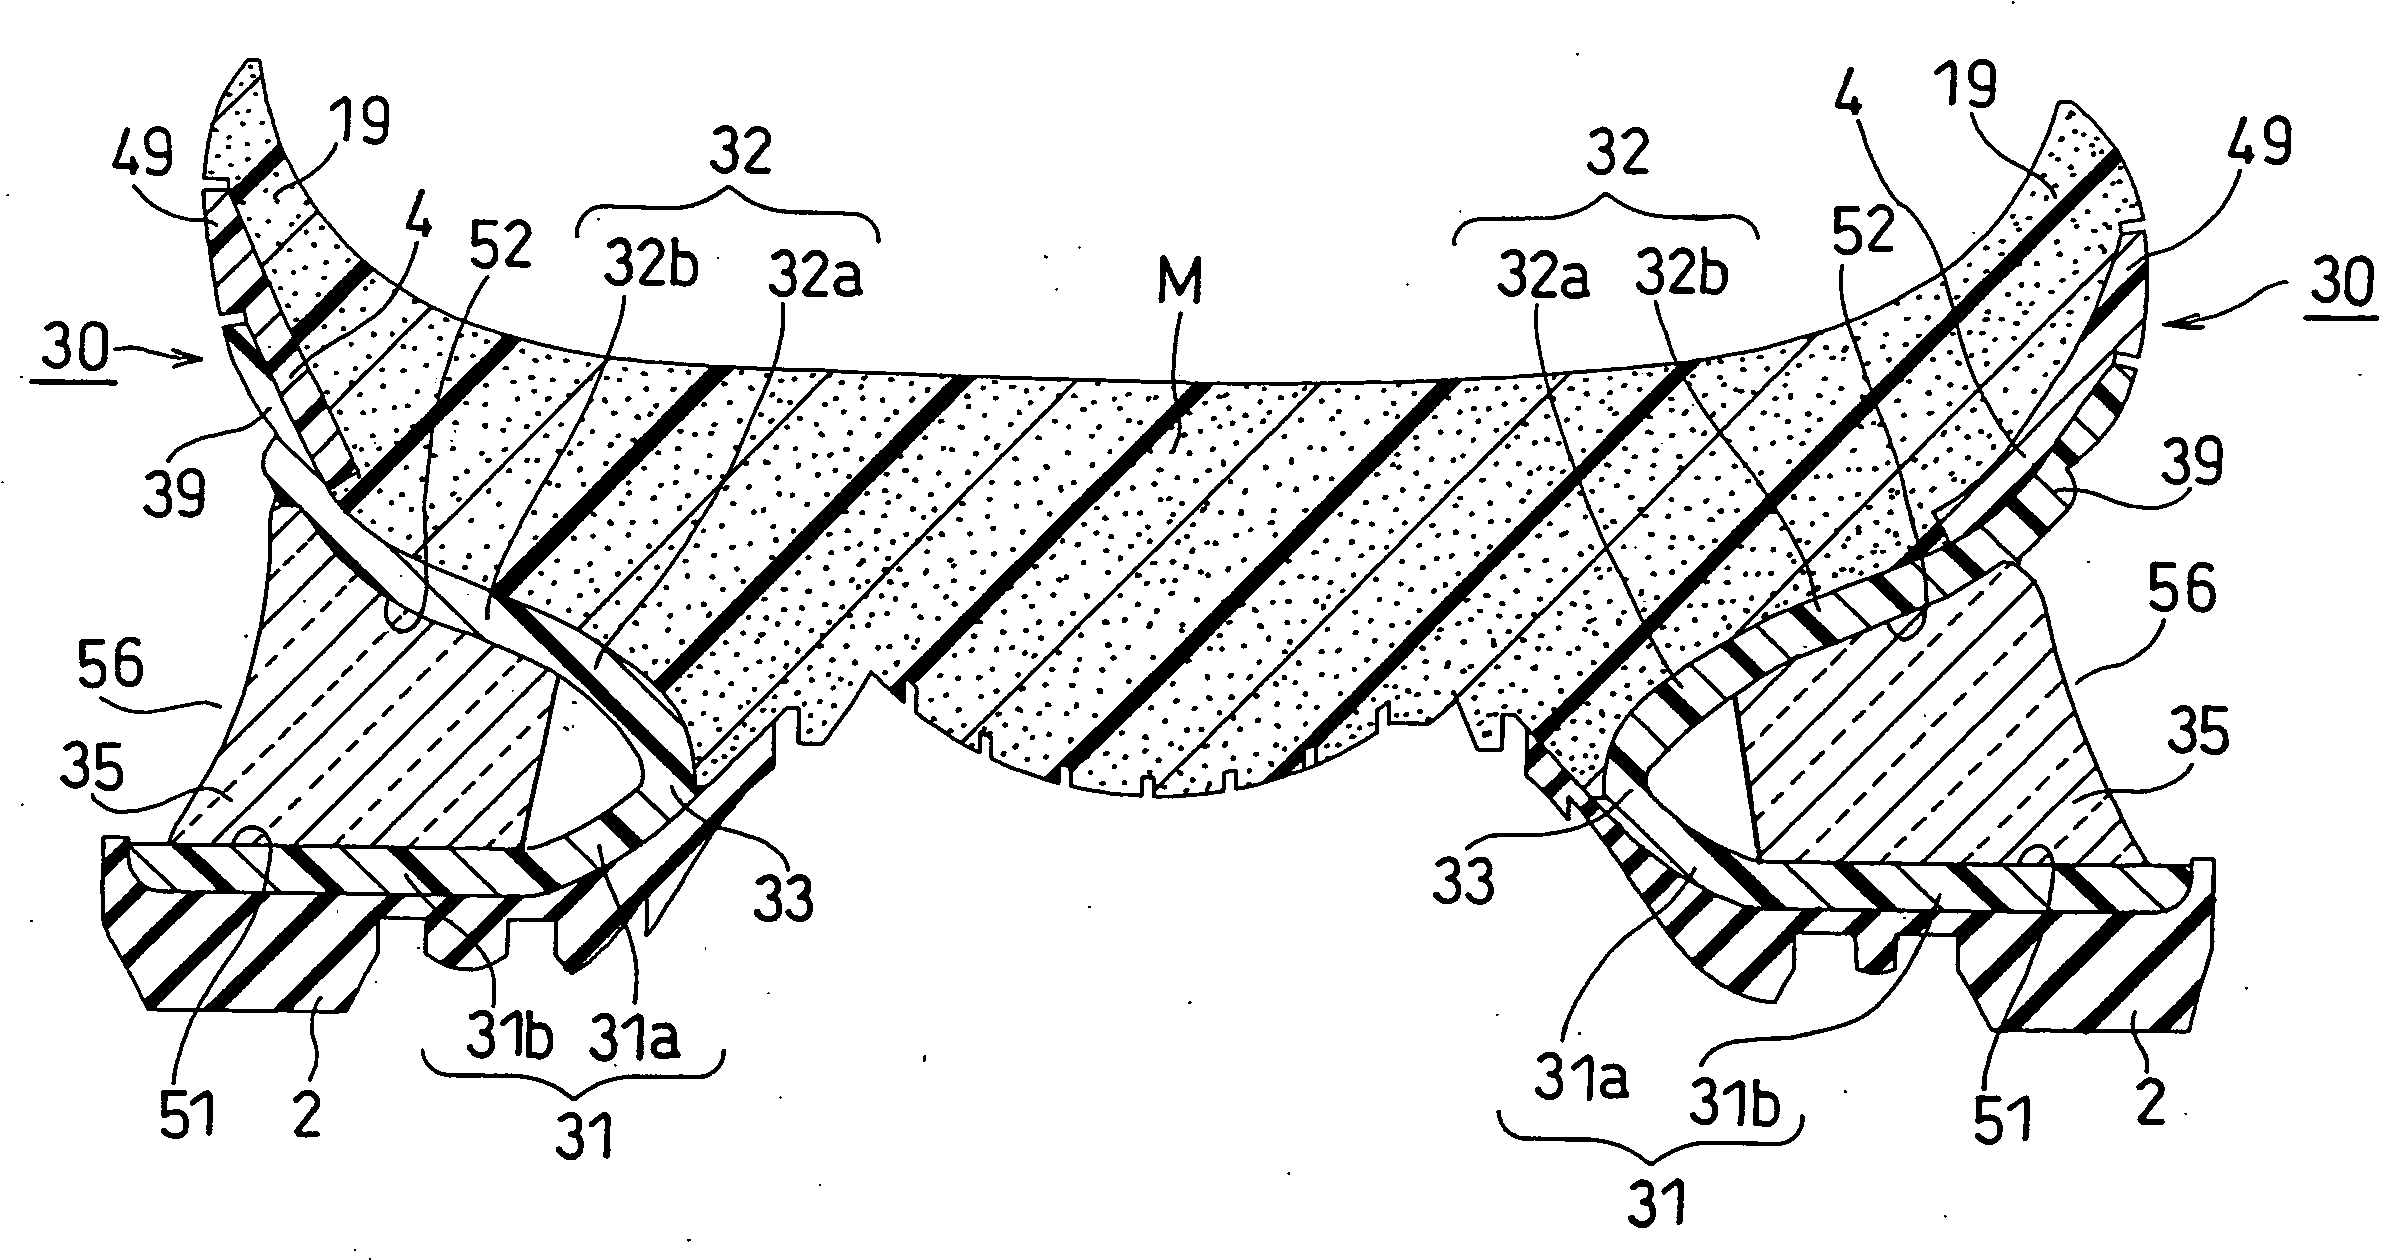 Shock absorbing device for shoe sole